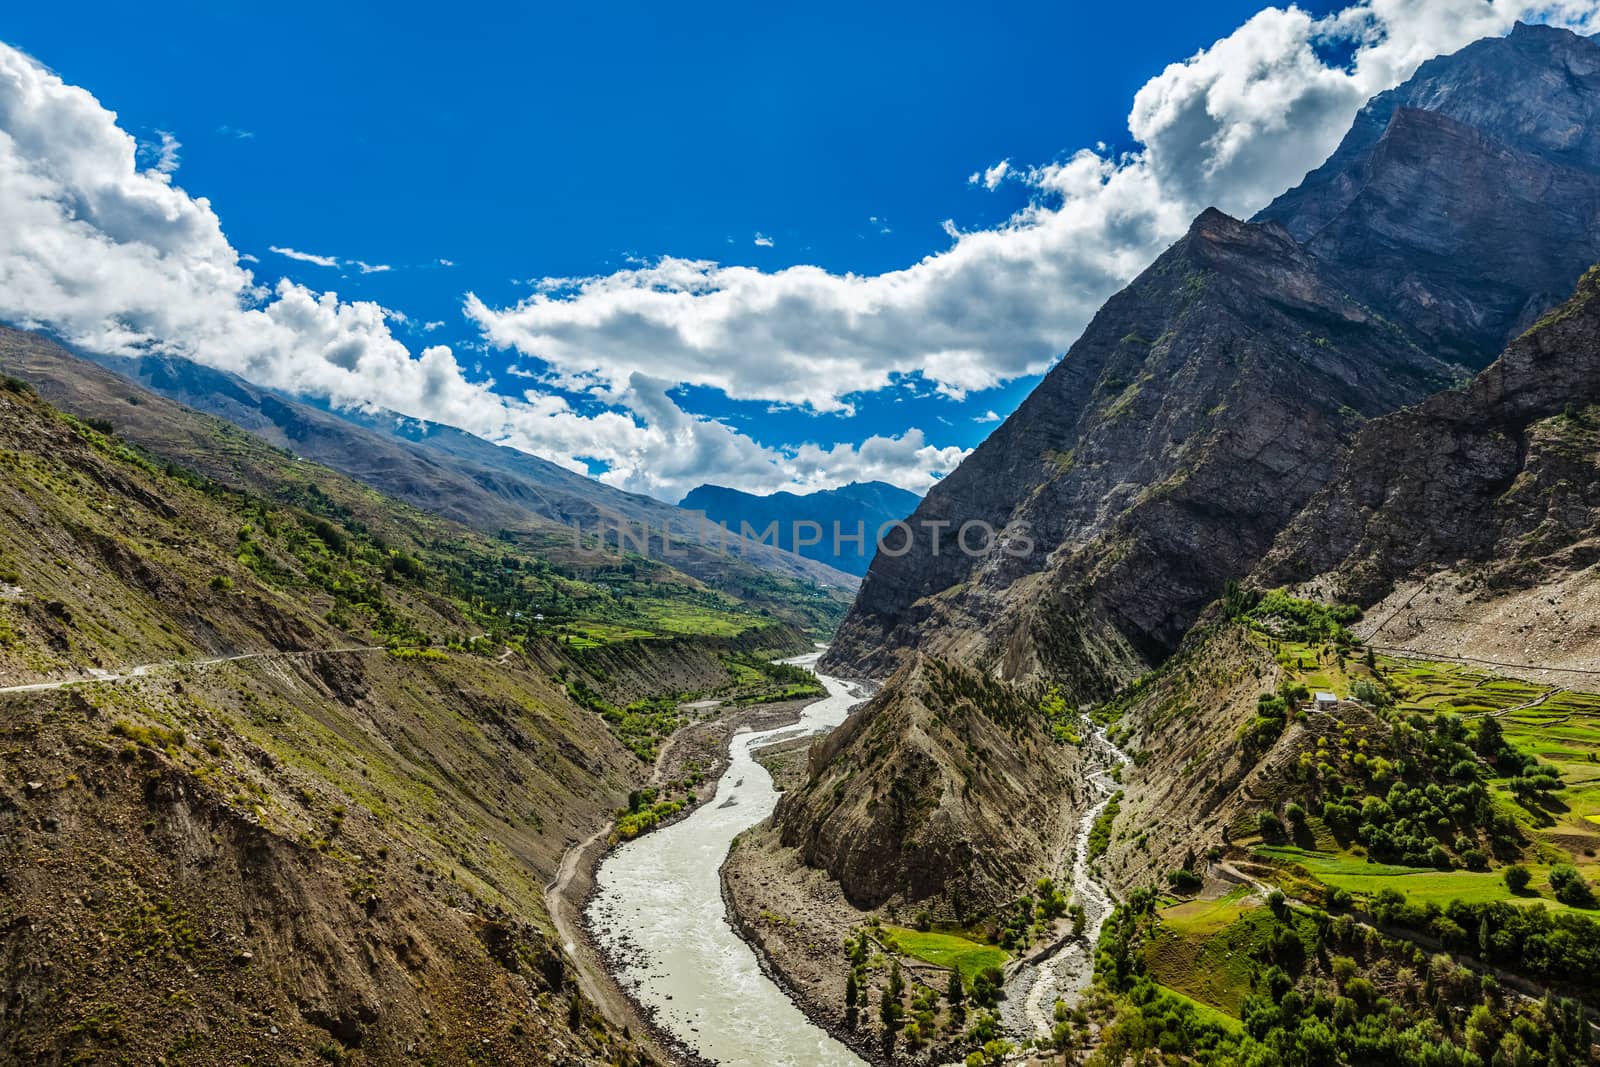 Chandra River in Himalayas by dimol